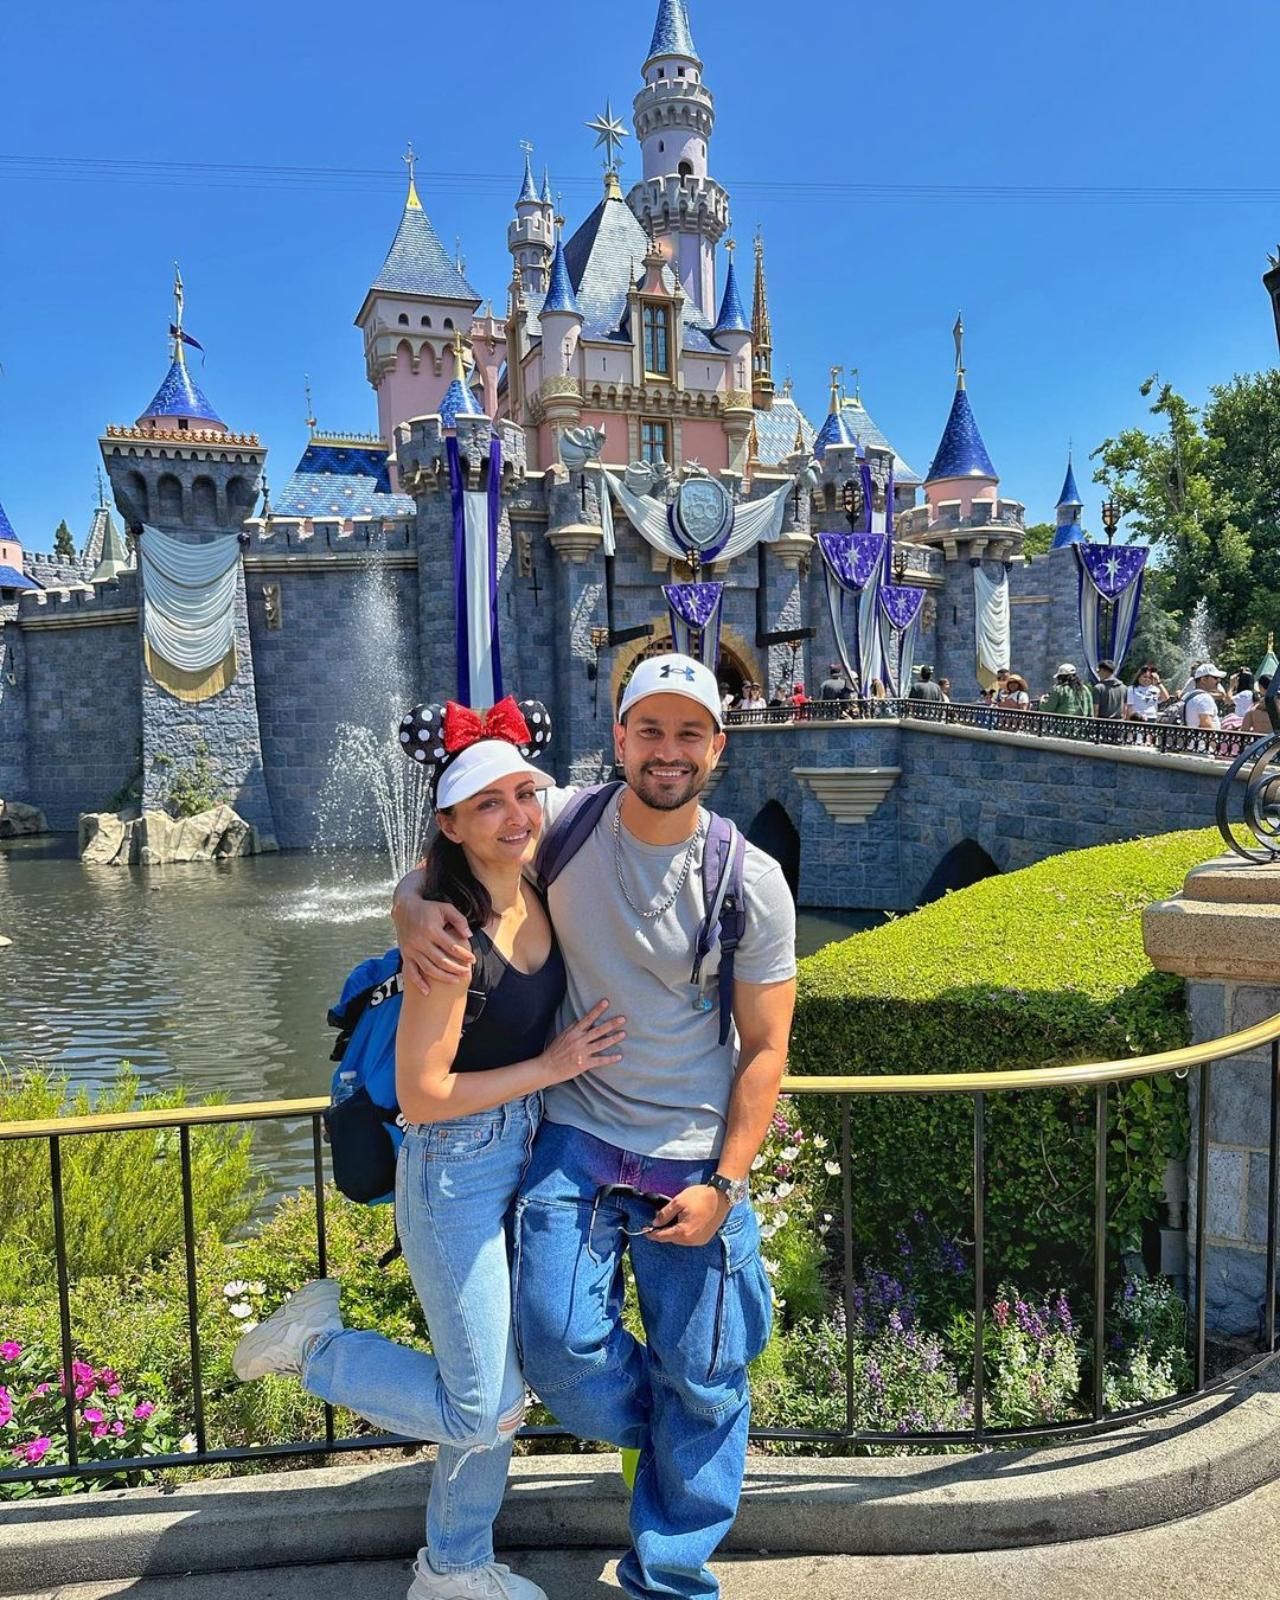 A trip to the USA without a detour to Disneyland? No way! Kunal and Soha look picture perfect against the iconic Disney castle